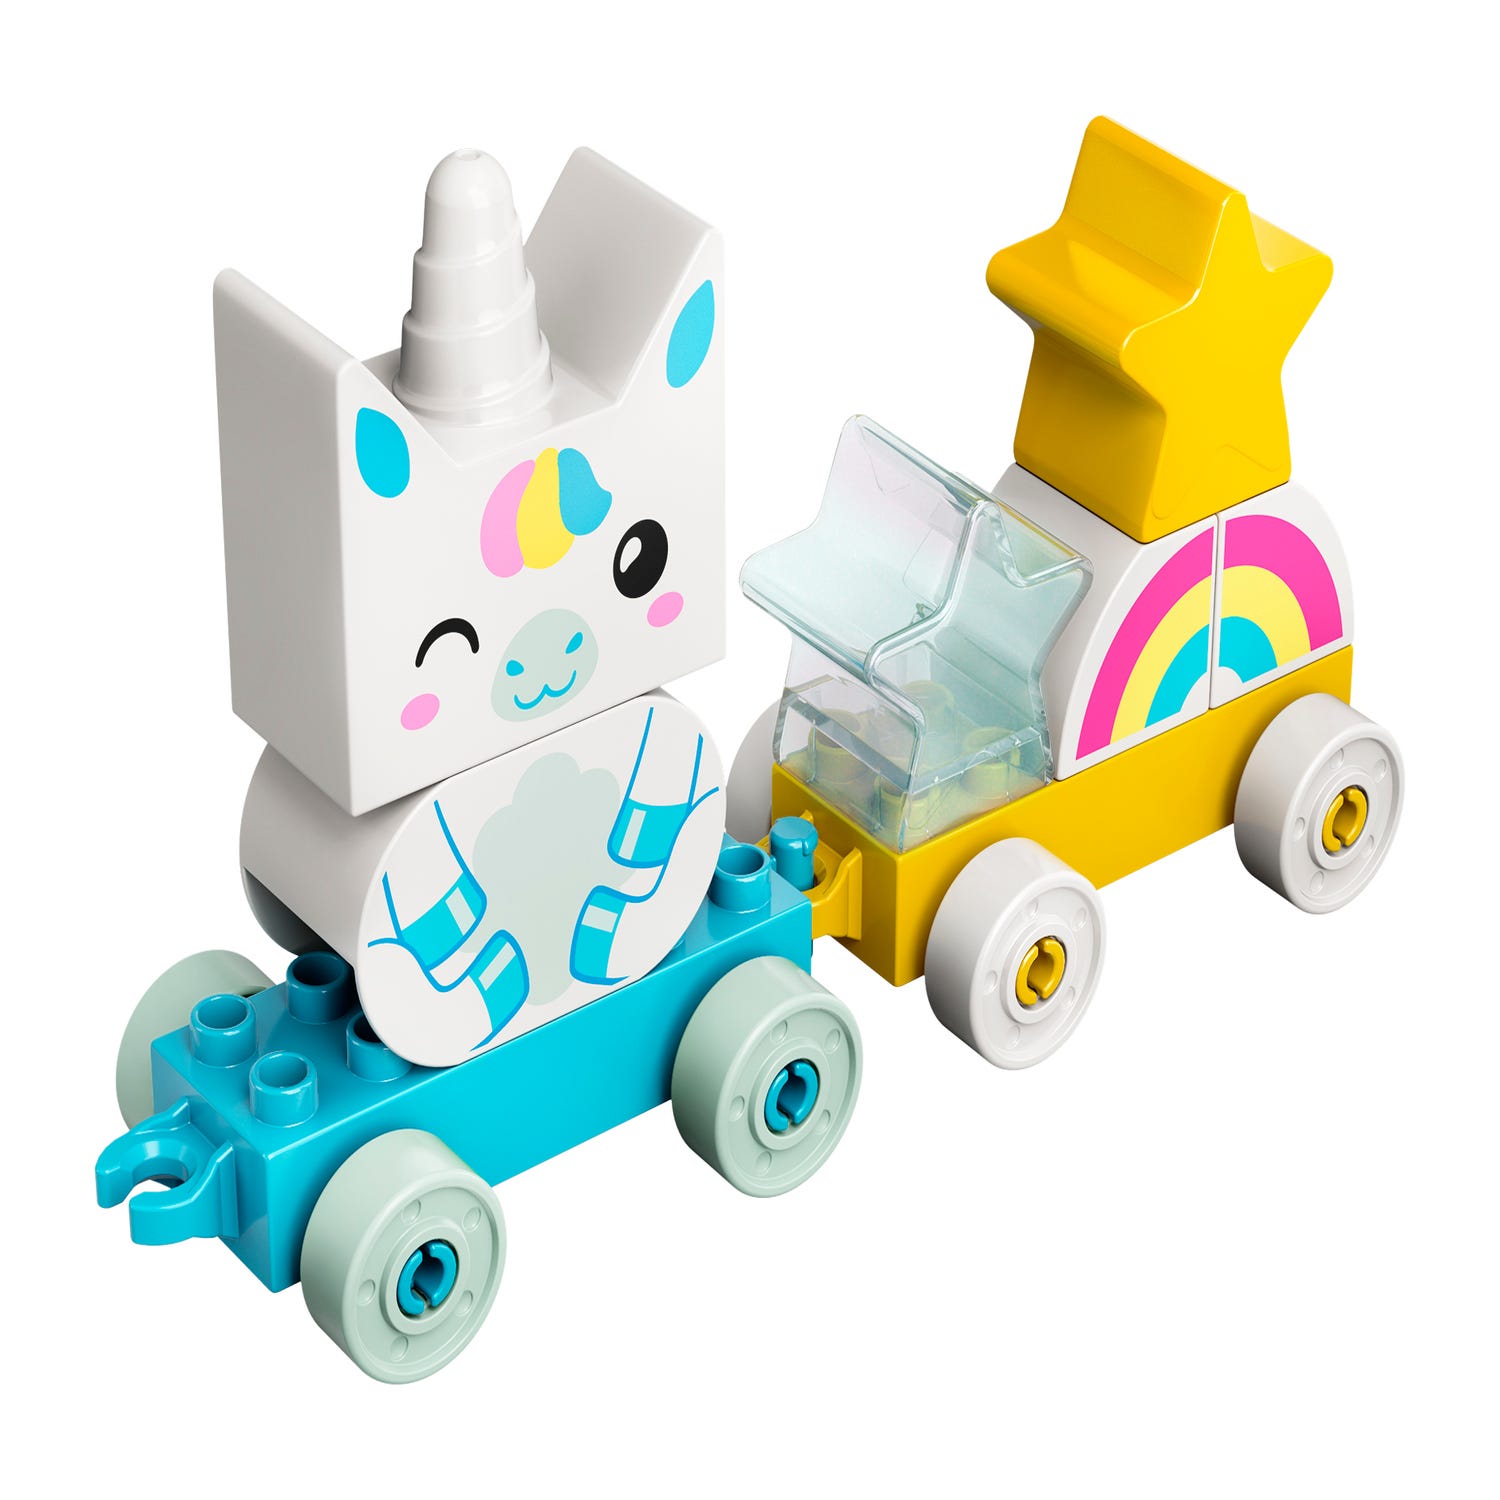 Unicorn 10953 | DUPLO® | LEGO® the US Buy online Official Shop at